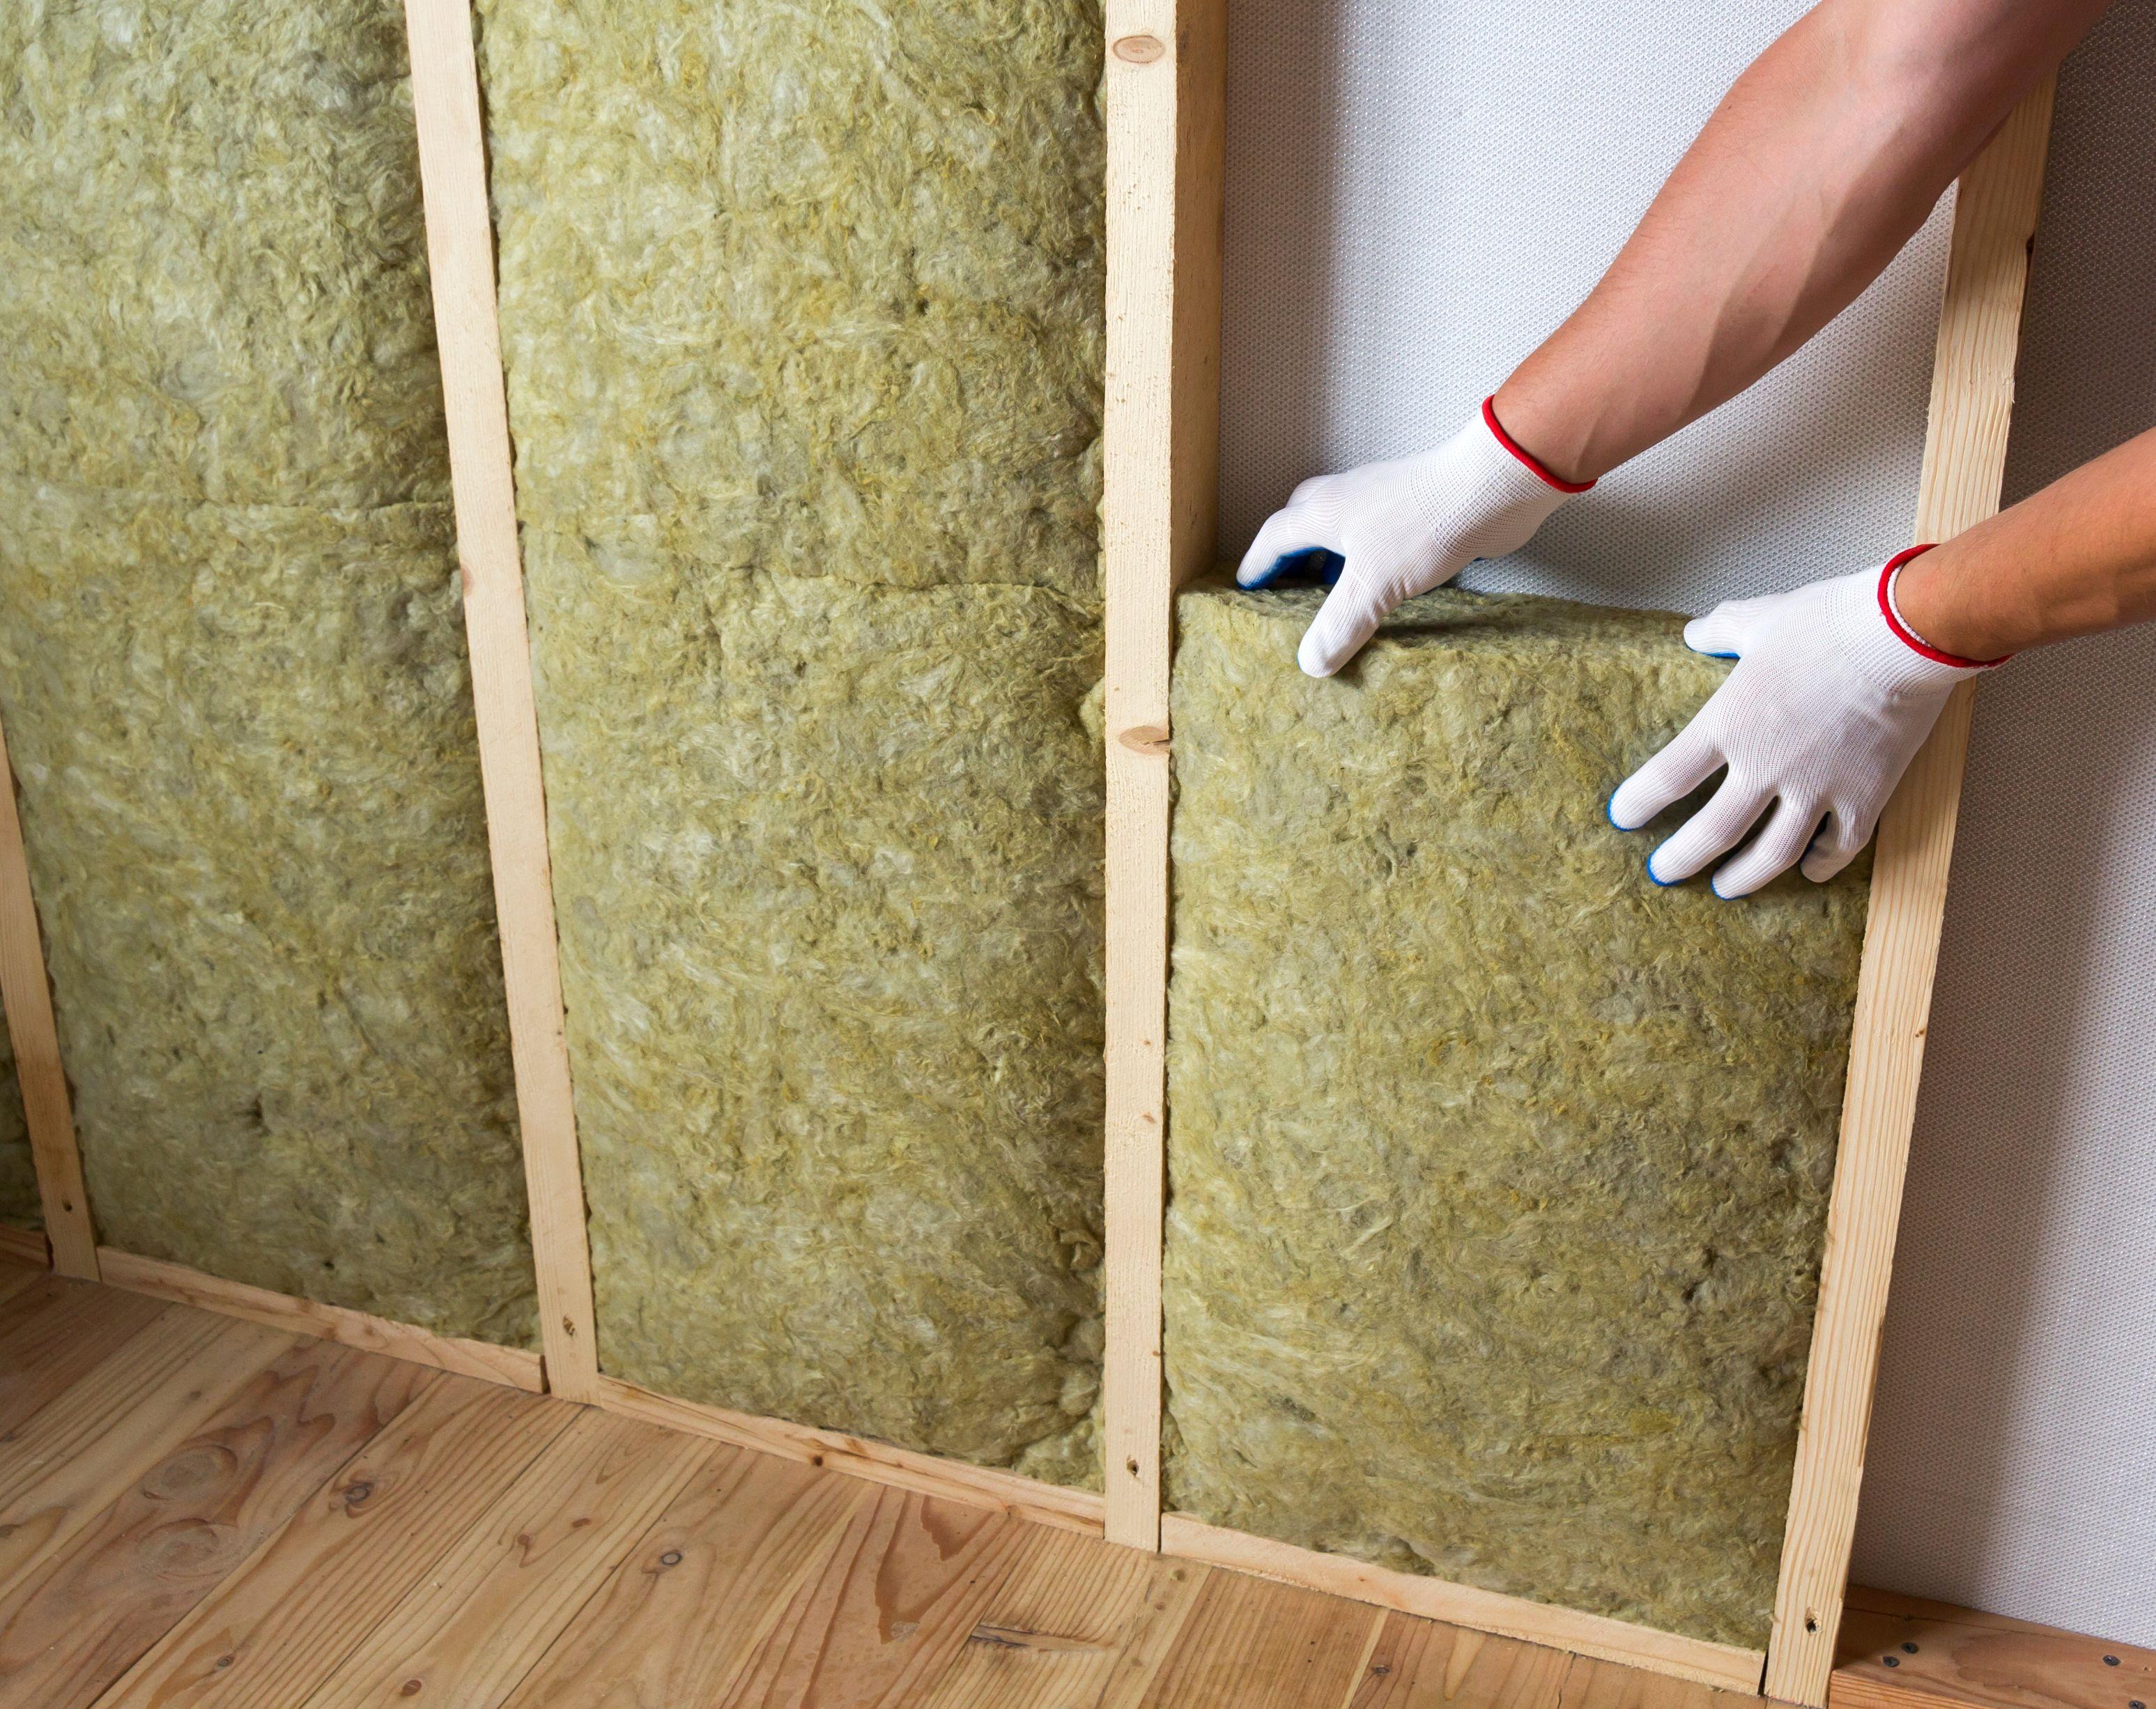 Insulating The Wall